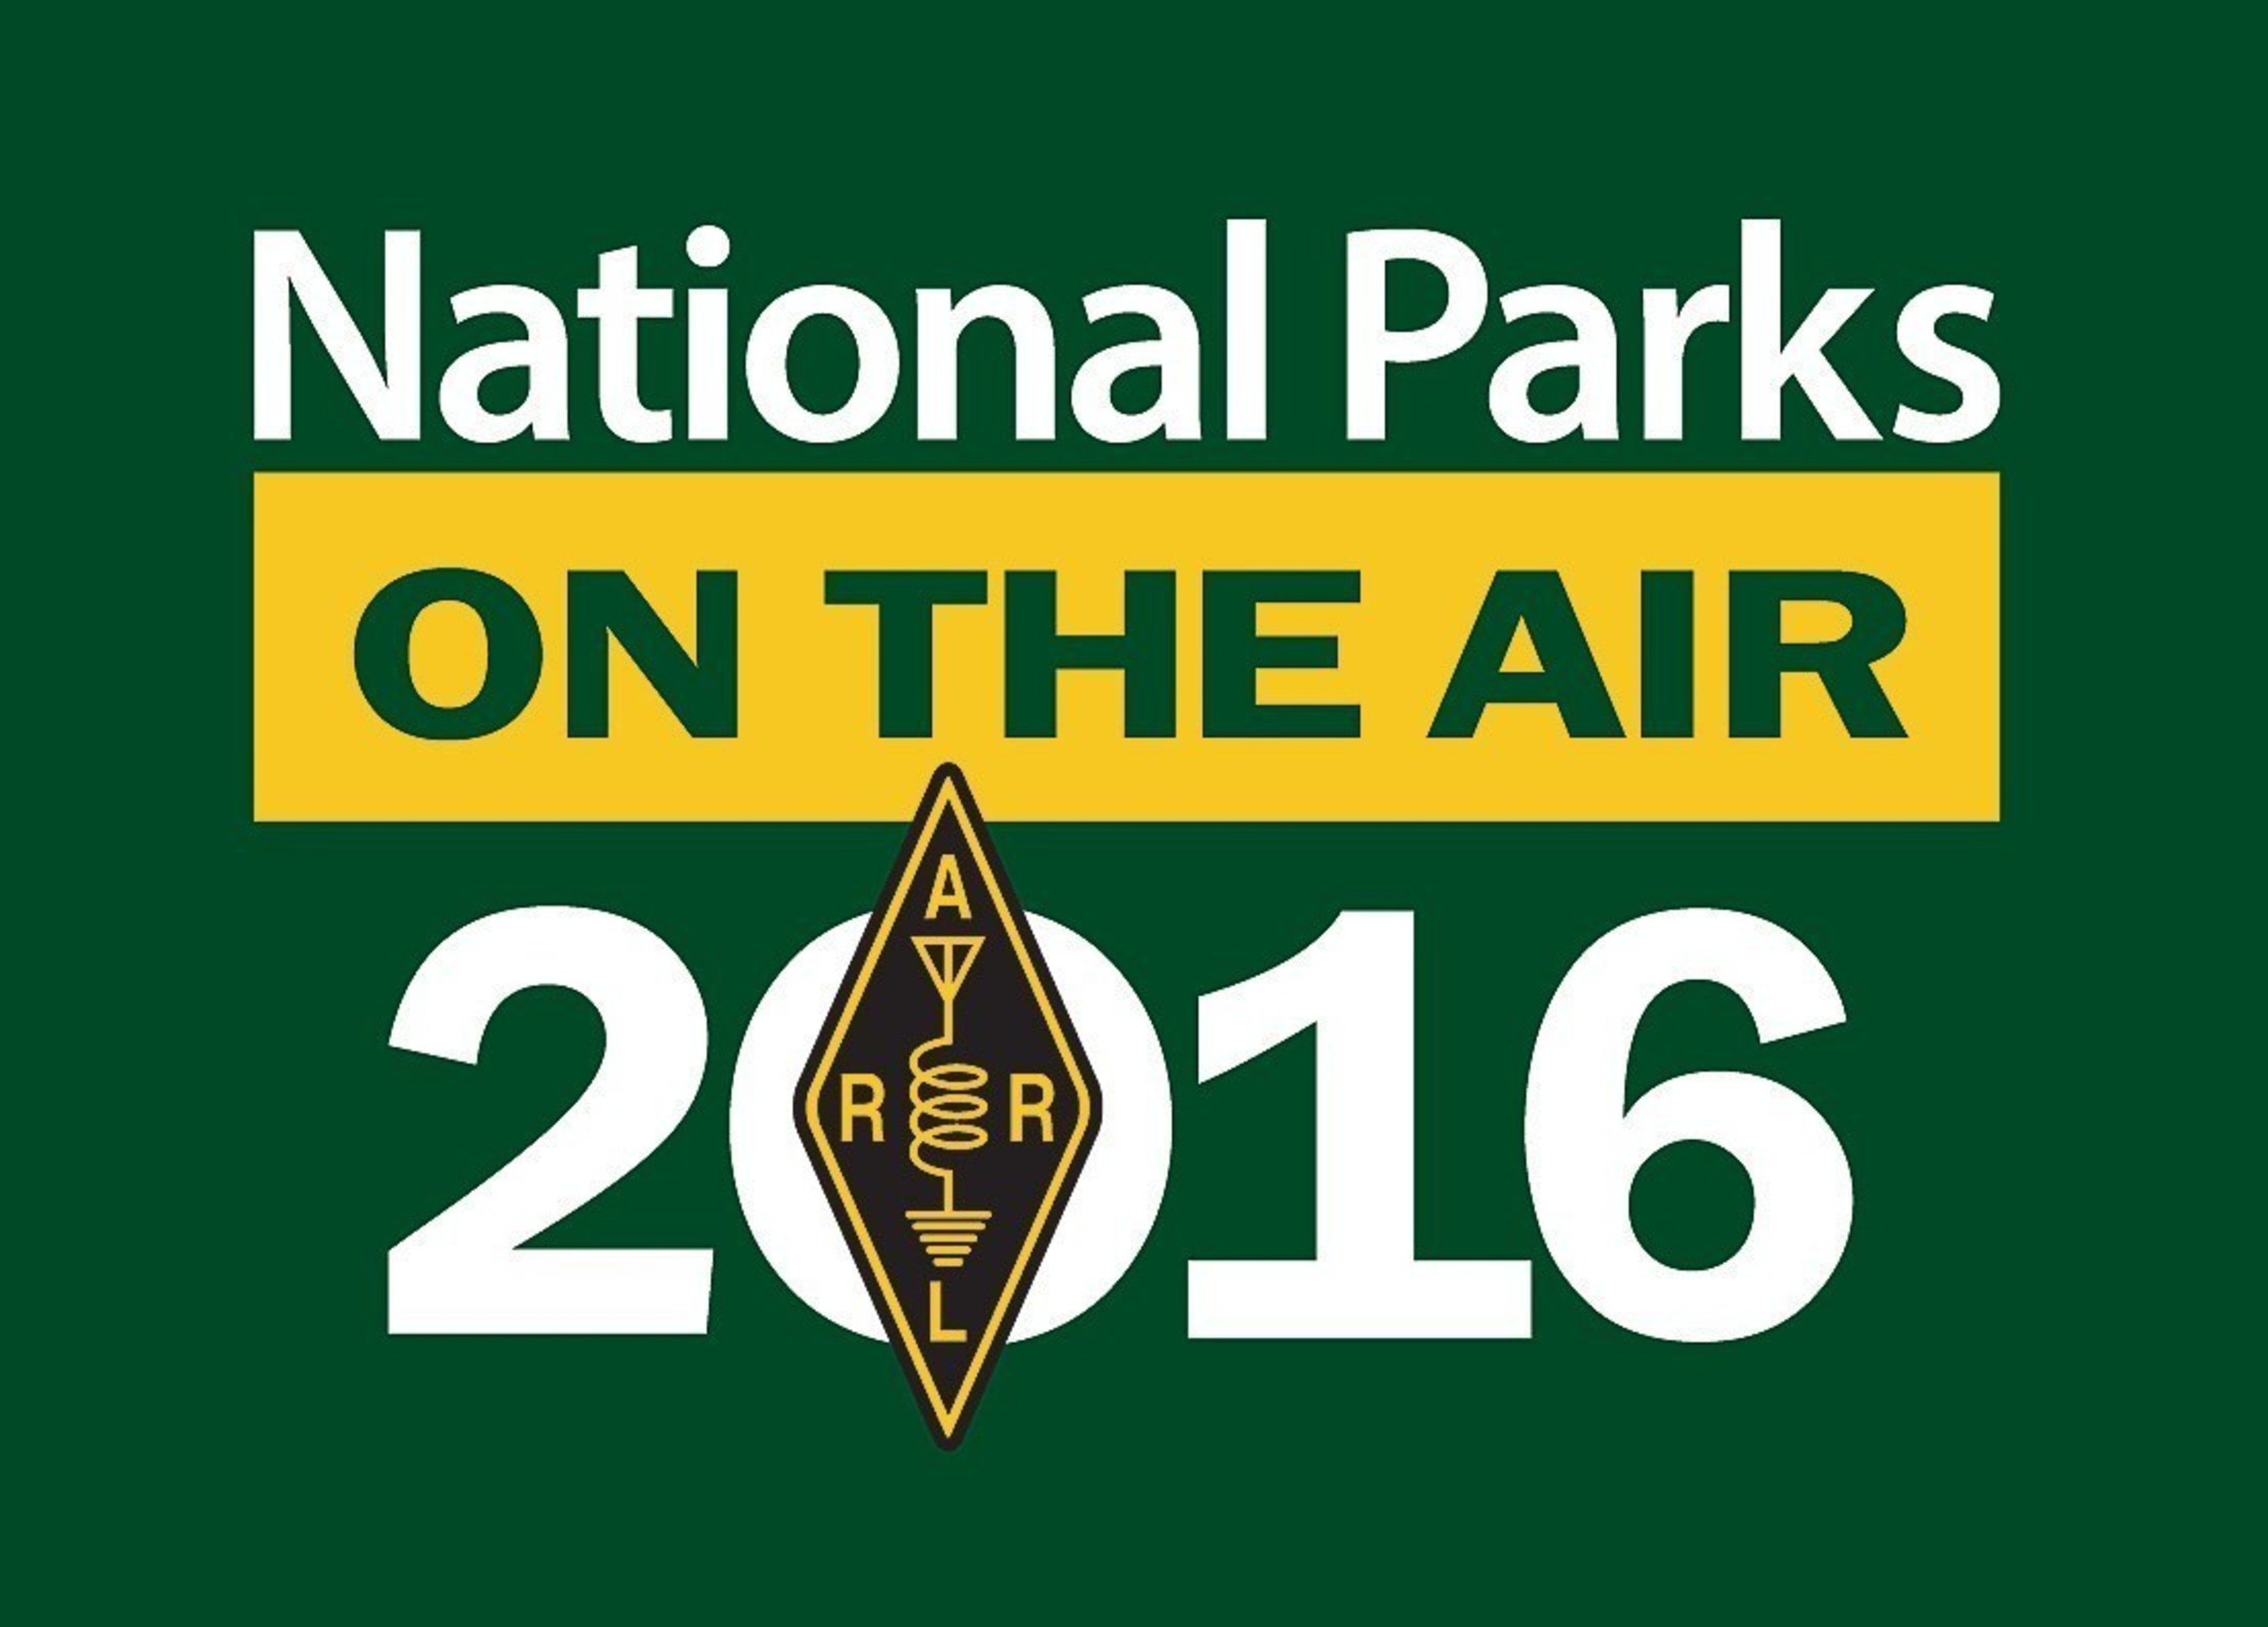 ARRL, the National Association for Amateur Radio, will coordinate "National Parks on the Air" in parallel with the centennial of the National Park Service. Ham radio operators nationwide will bring portable radio gear to NPS units and provide two-way radio contacts with other ham operators worldwide. Over 430 NPS units are eligible for the year-long event. Complete information is at www.arrl.org/NPOTA.